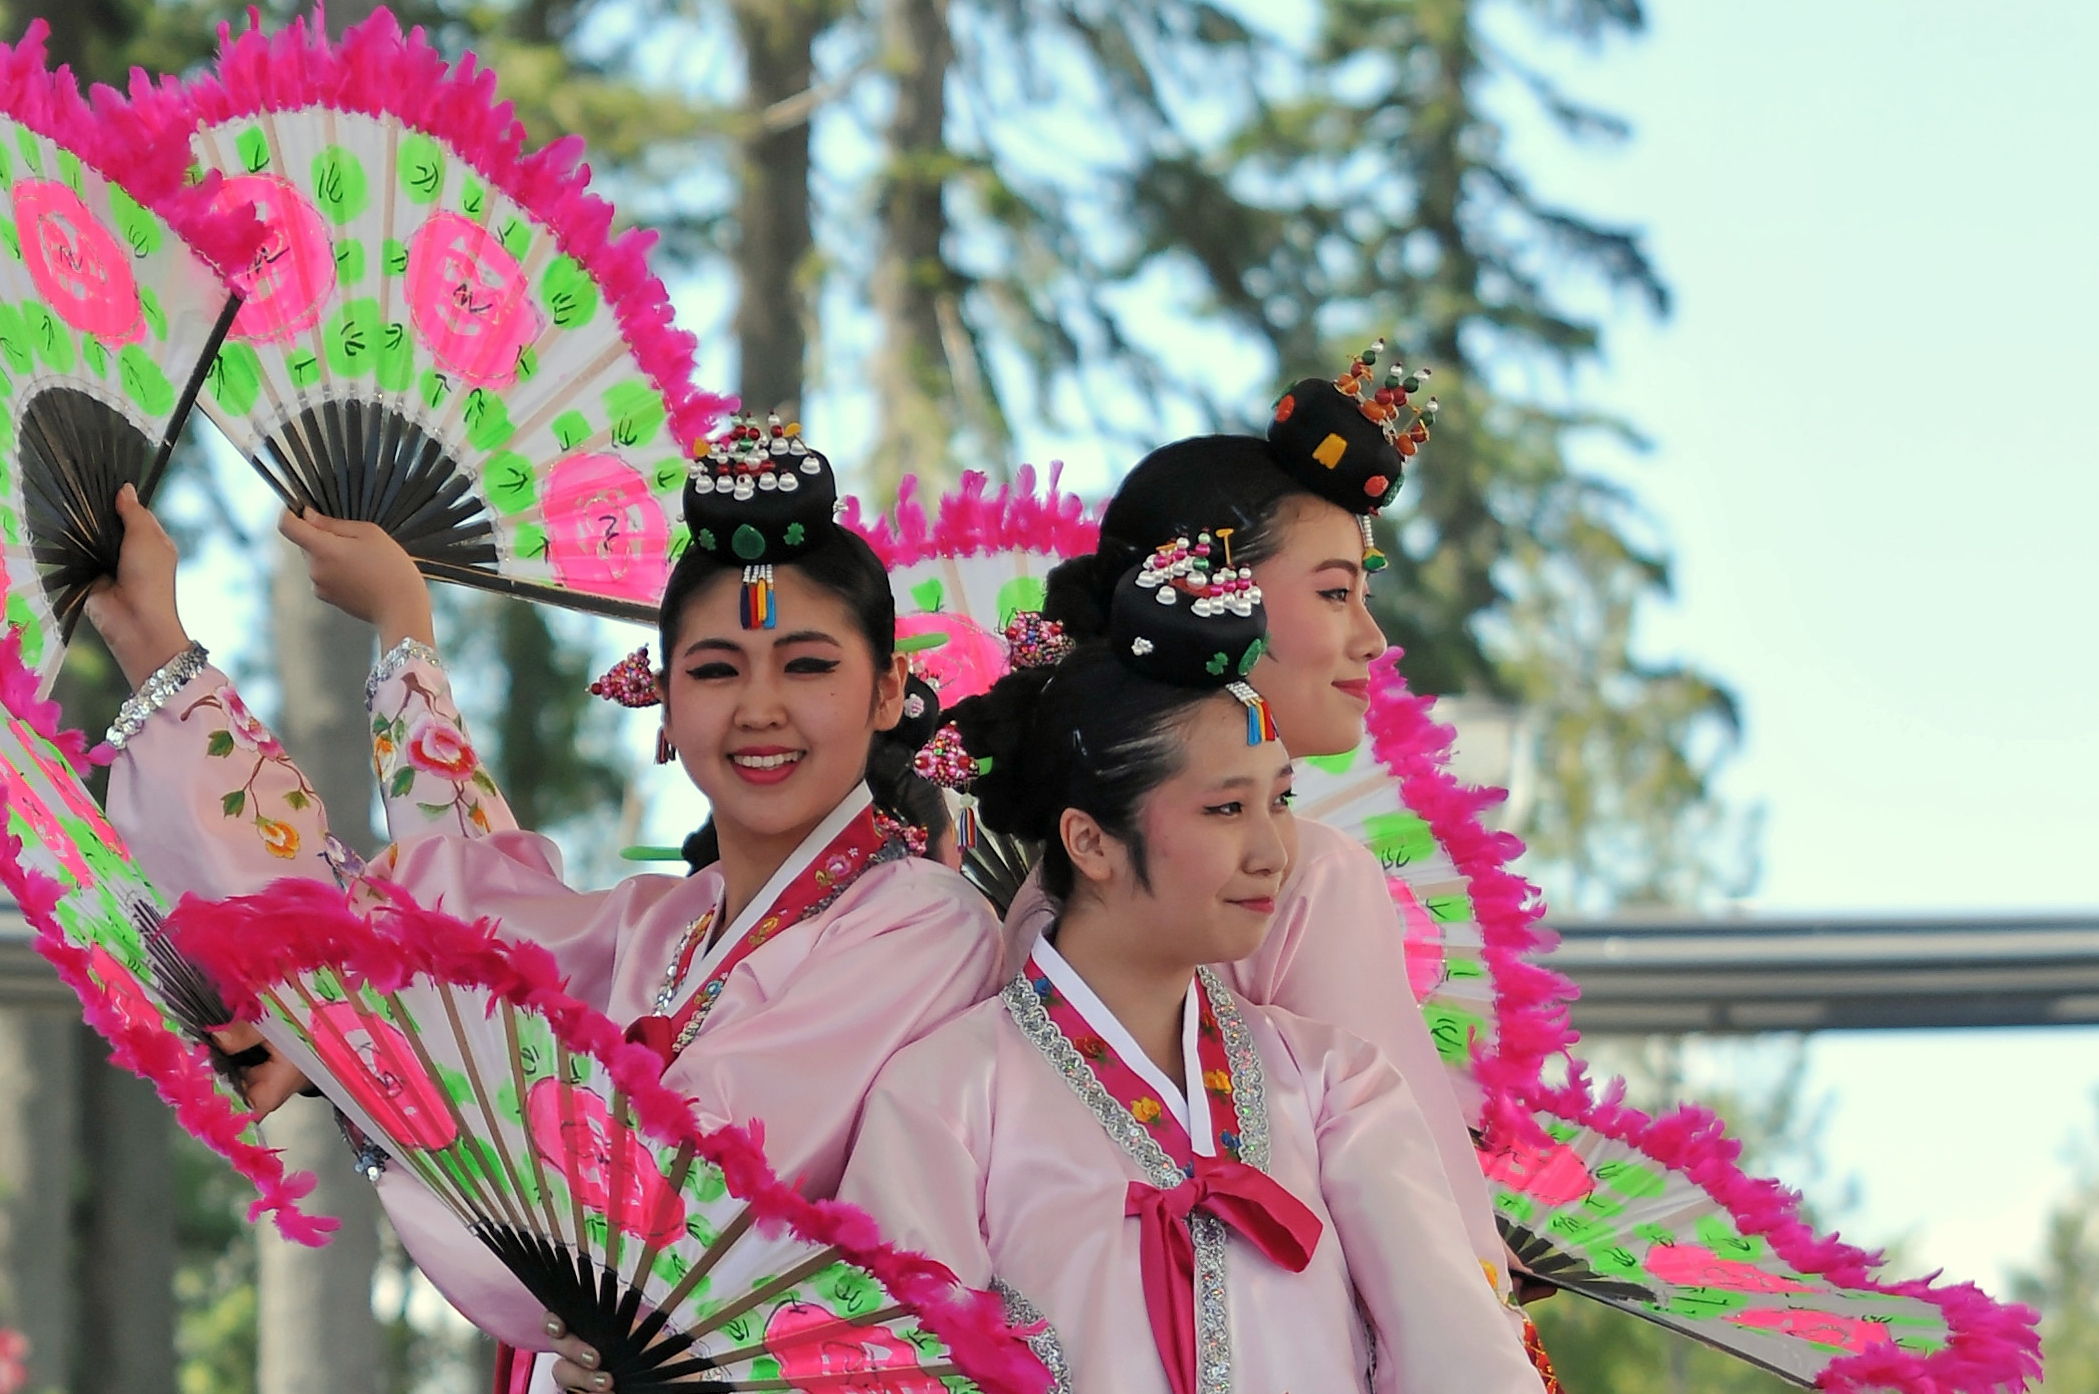 the oriental girls have pink and green colors